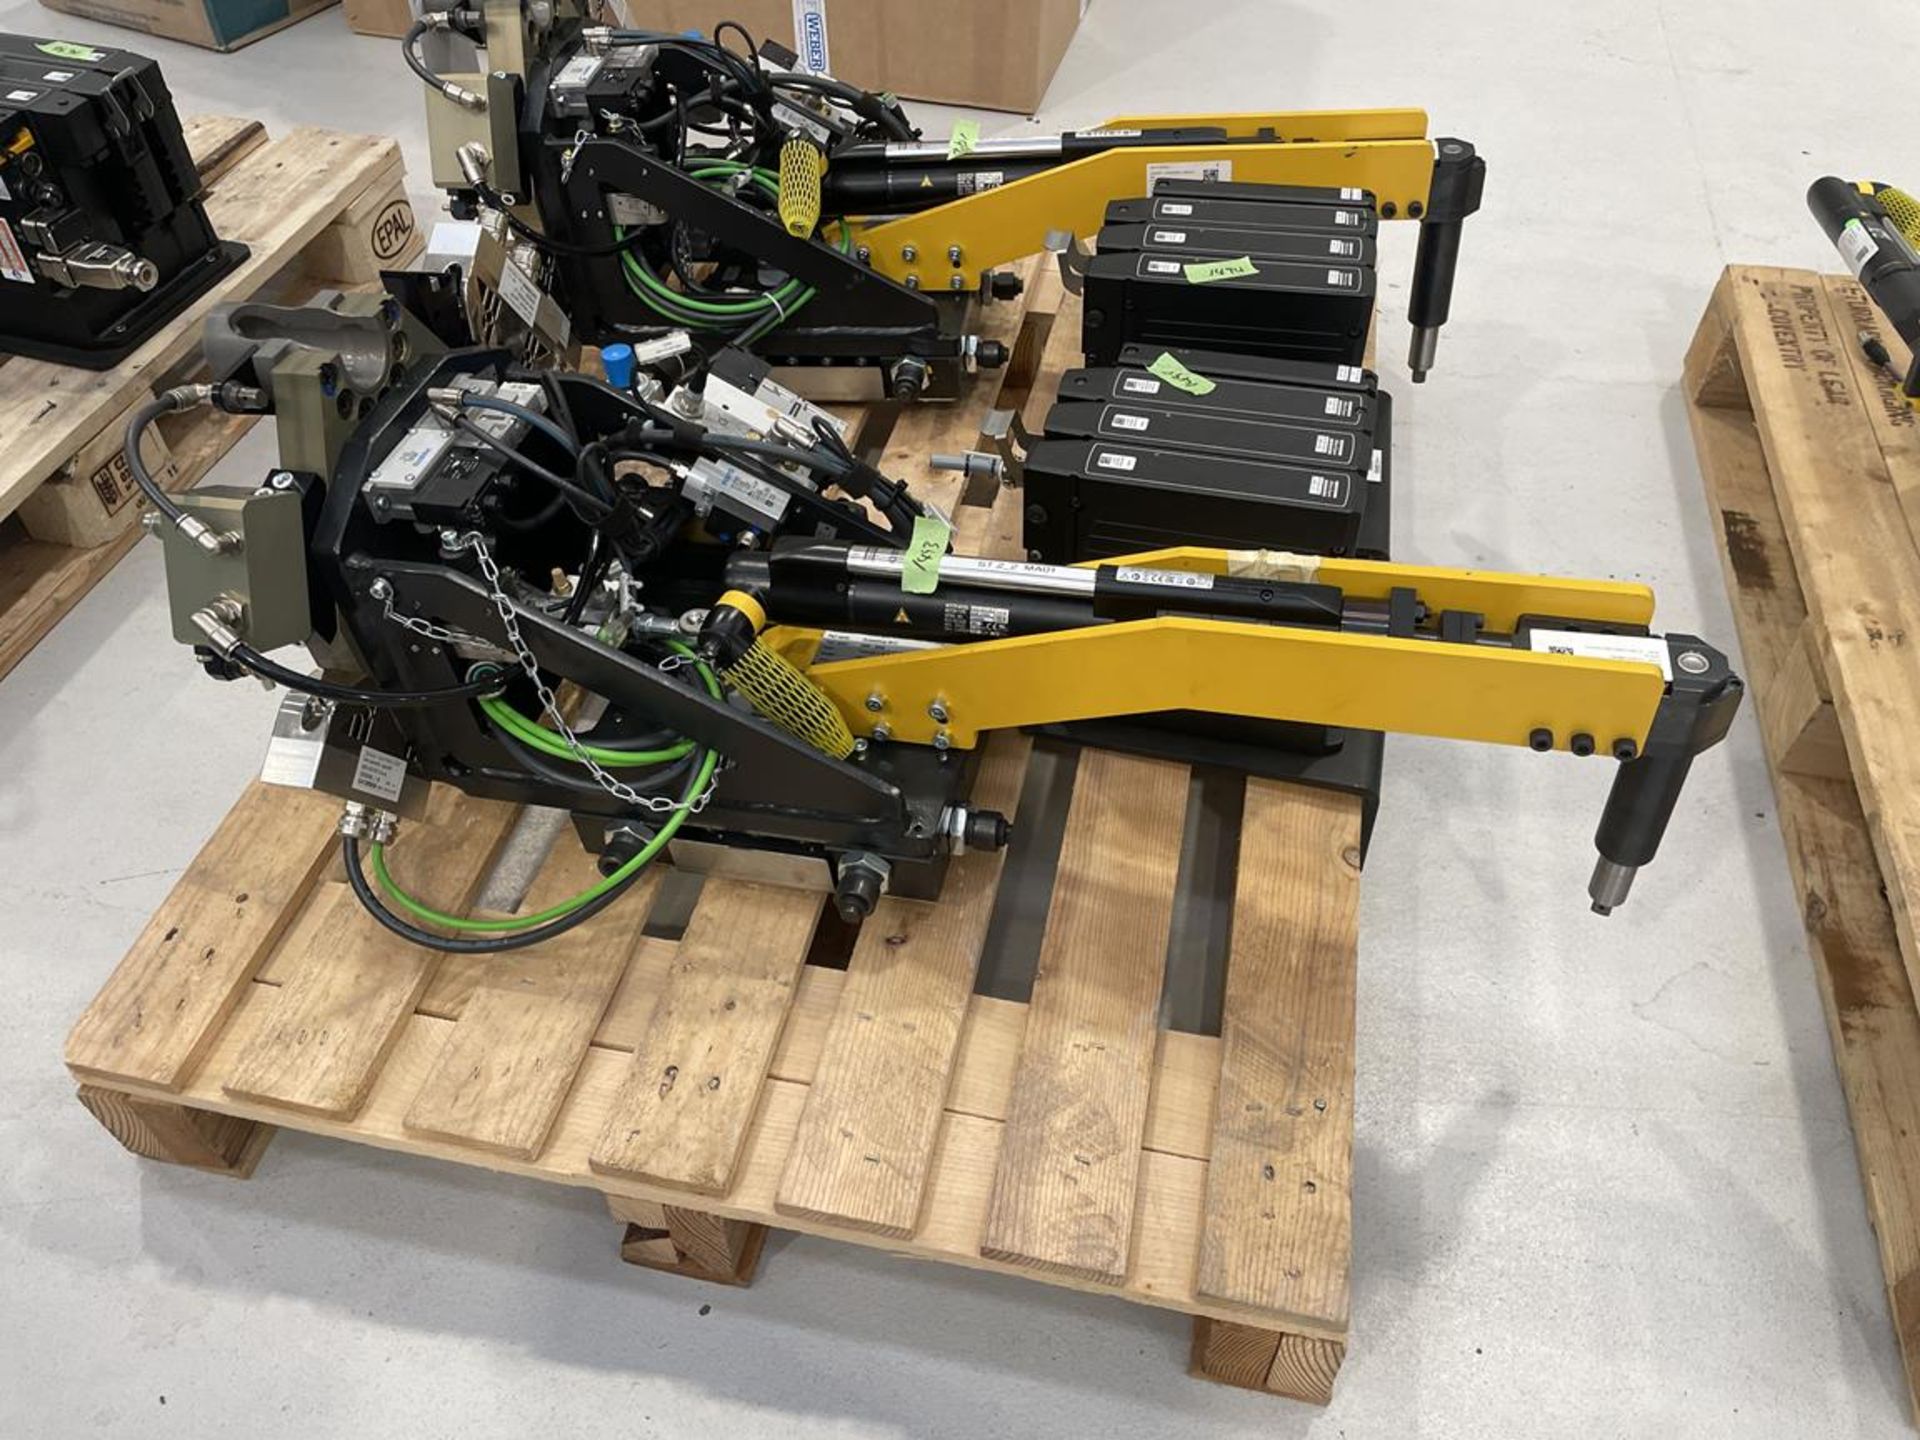 Robot mounted bolt/stud tightening consol with Atlas Copco, QST nut runner tool, connectors, pipewor